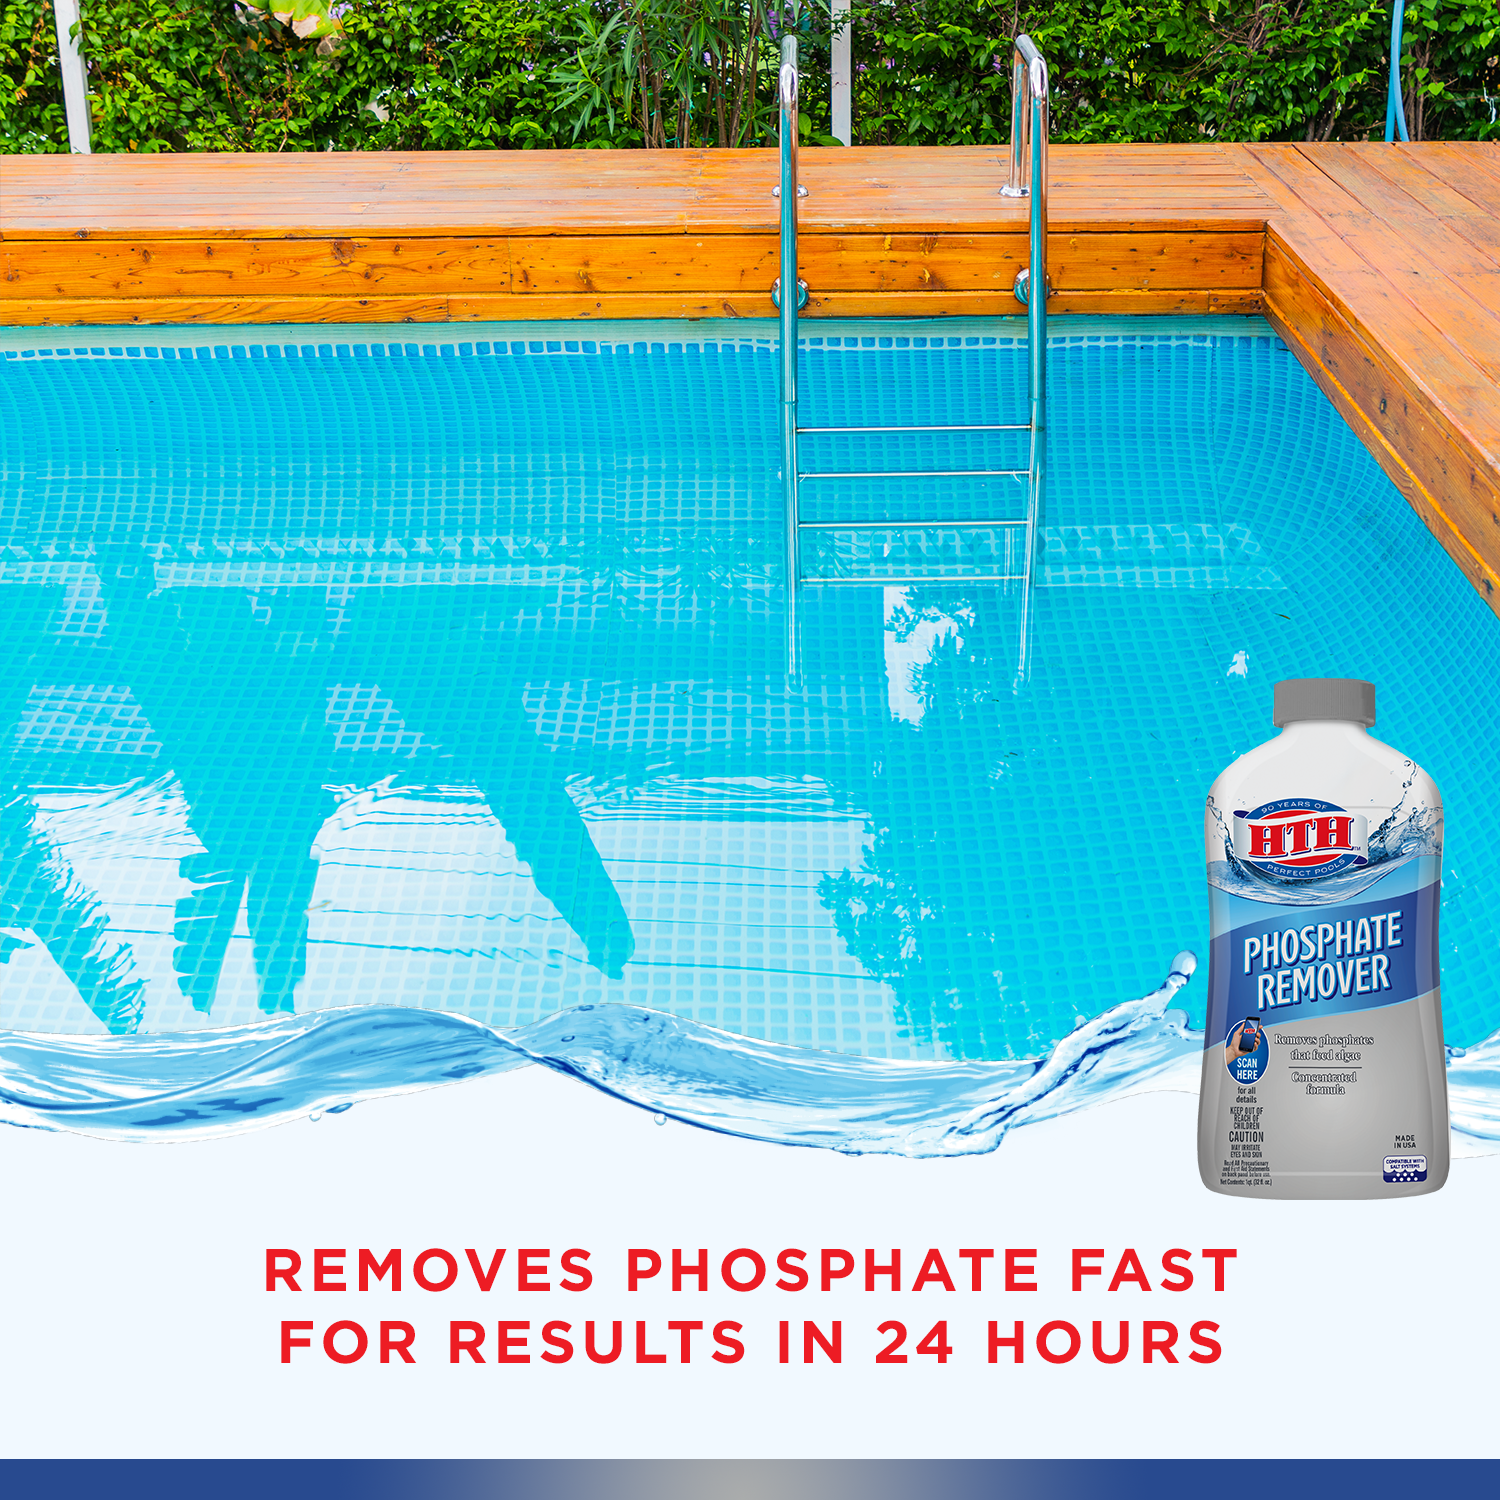 HTH® Phosphate Remover